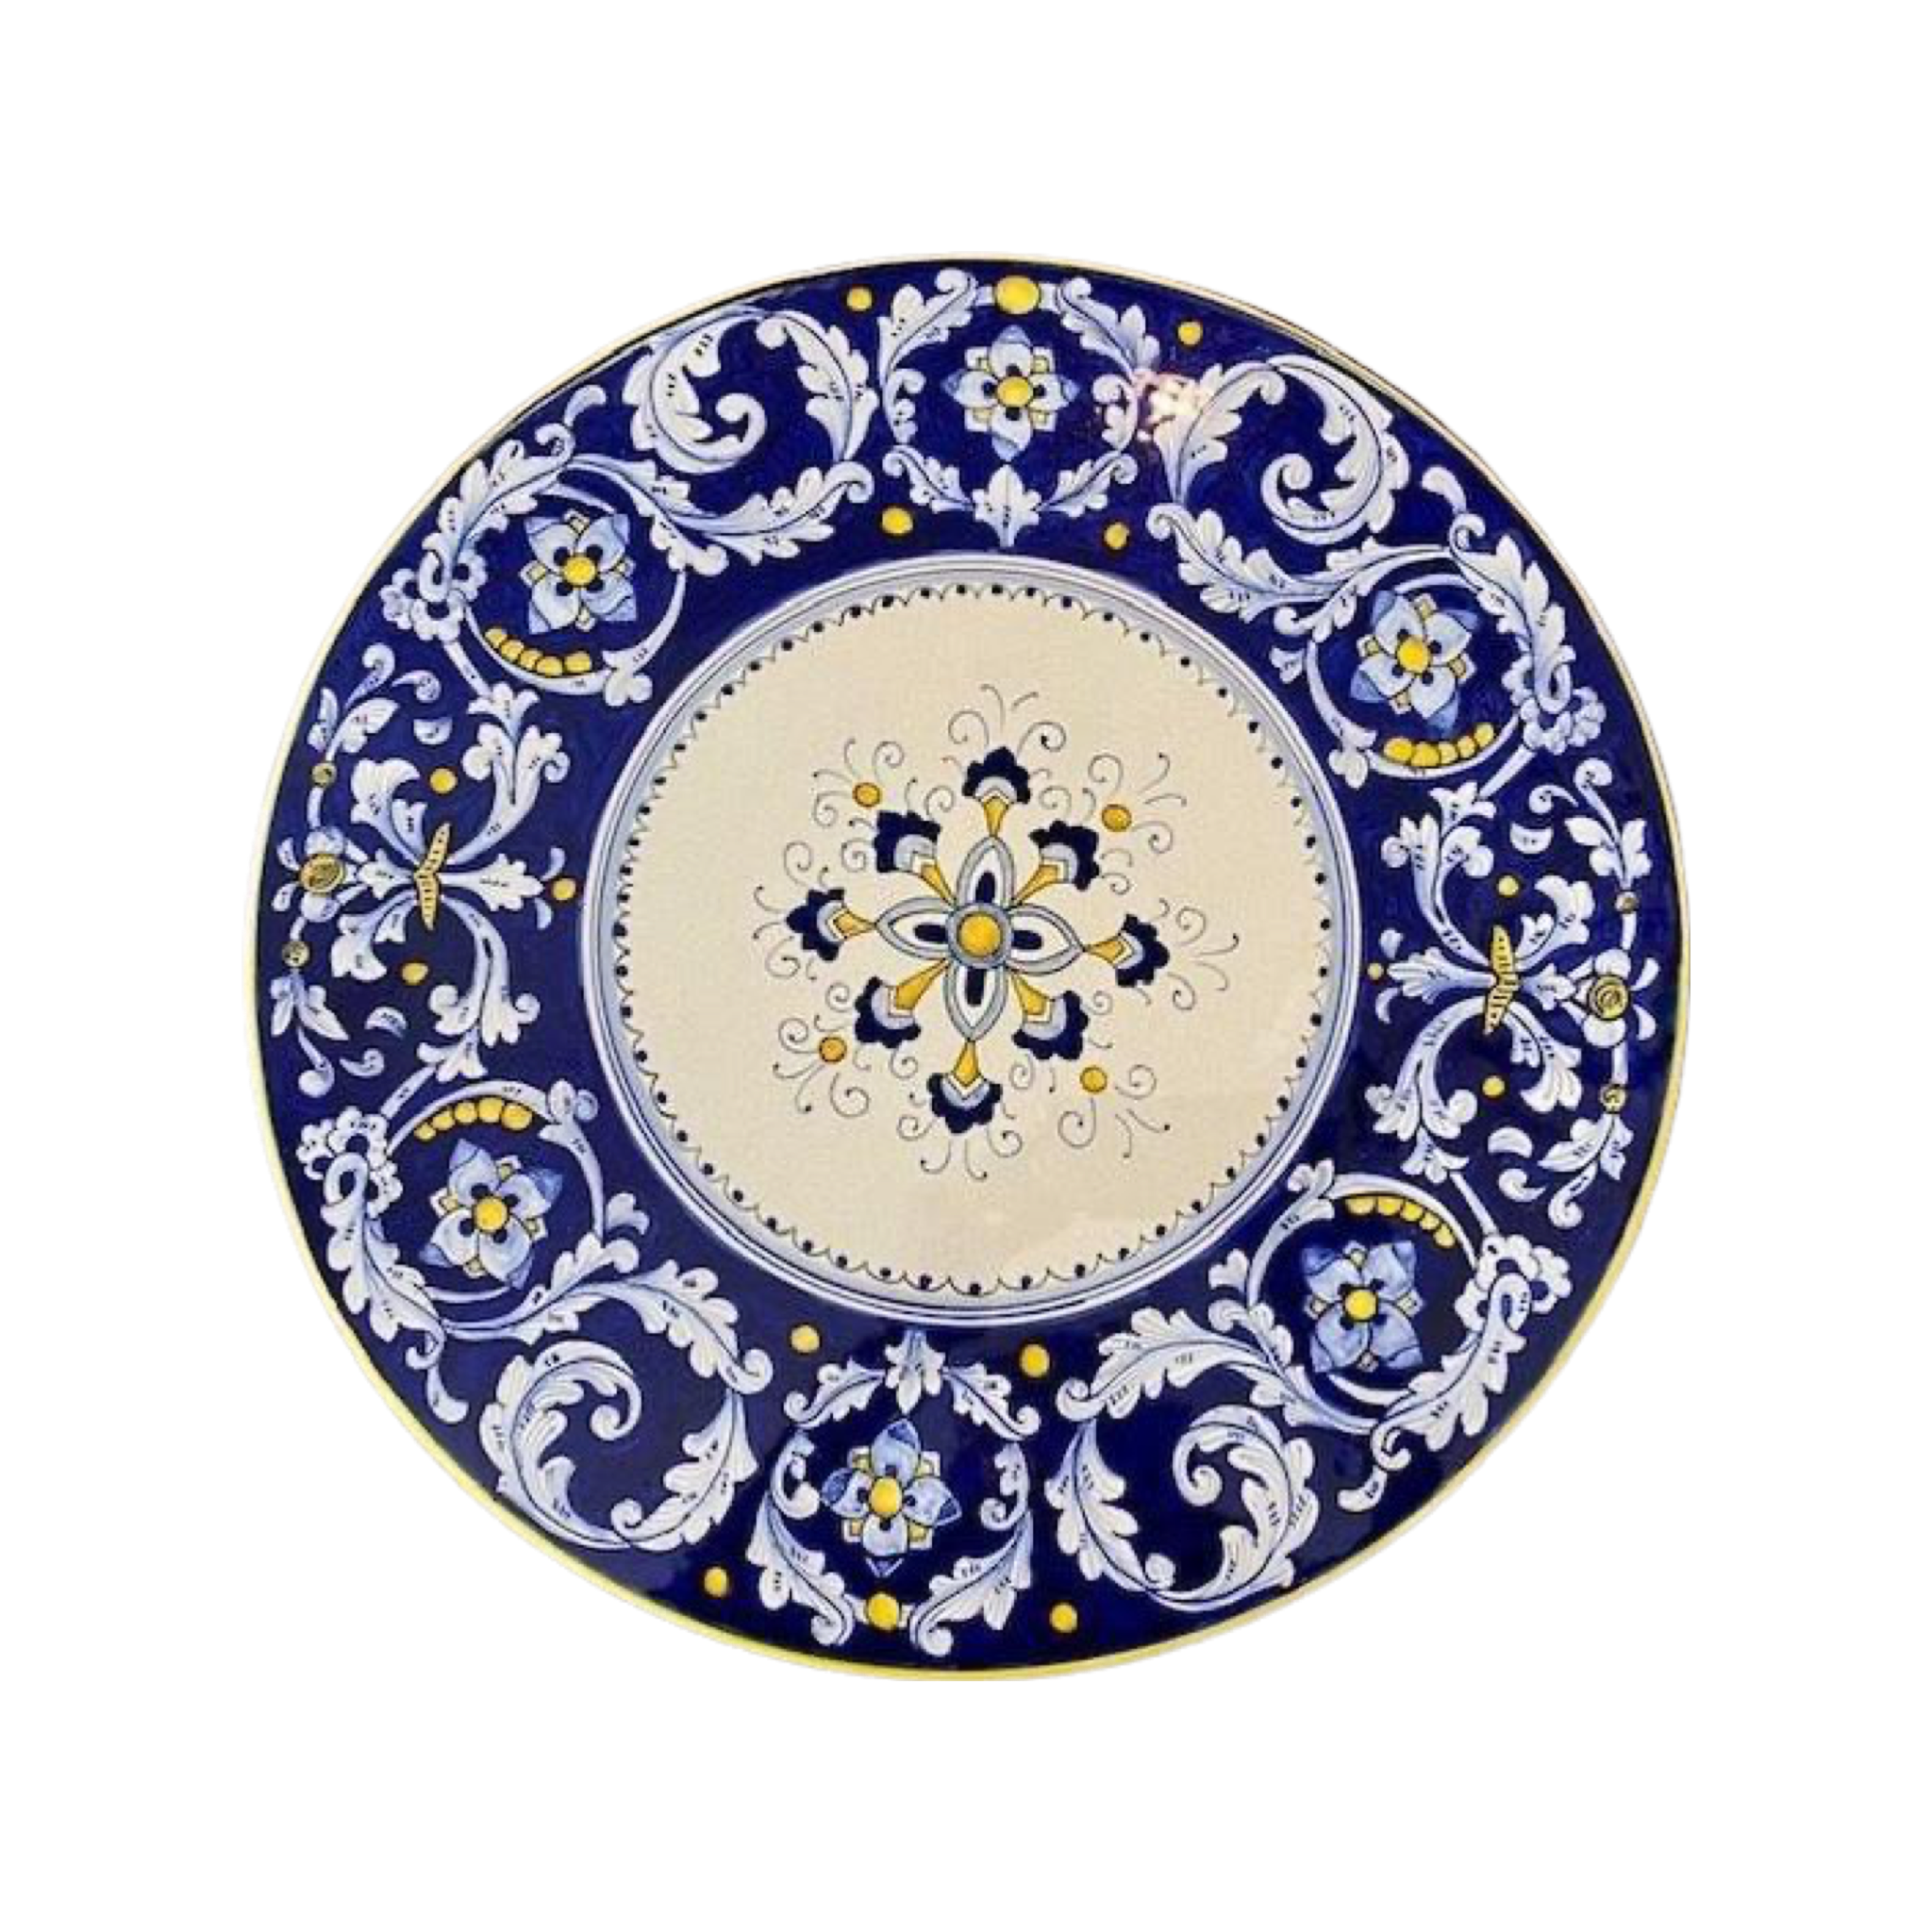 Antico Deruta - Lazy Susan, ceramics, pottery, italian design, majolica, handmade, handcrafted, handpainted, home decor, kitchen art, home goods, deruta, majolica, Artisan, treasures, traditional art, modern art, gift ideas, style, SF, shop small business, artists, shop online, landmark store, legacy, one of a kind, limited edition, gift guide, gift shop, retail shop, decorations, shopping, italy, home staging, home decorating, home interiors